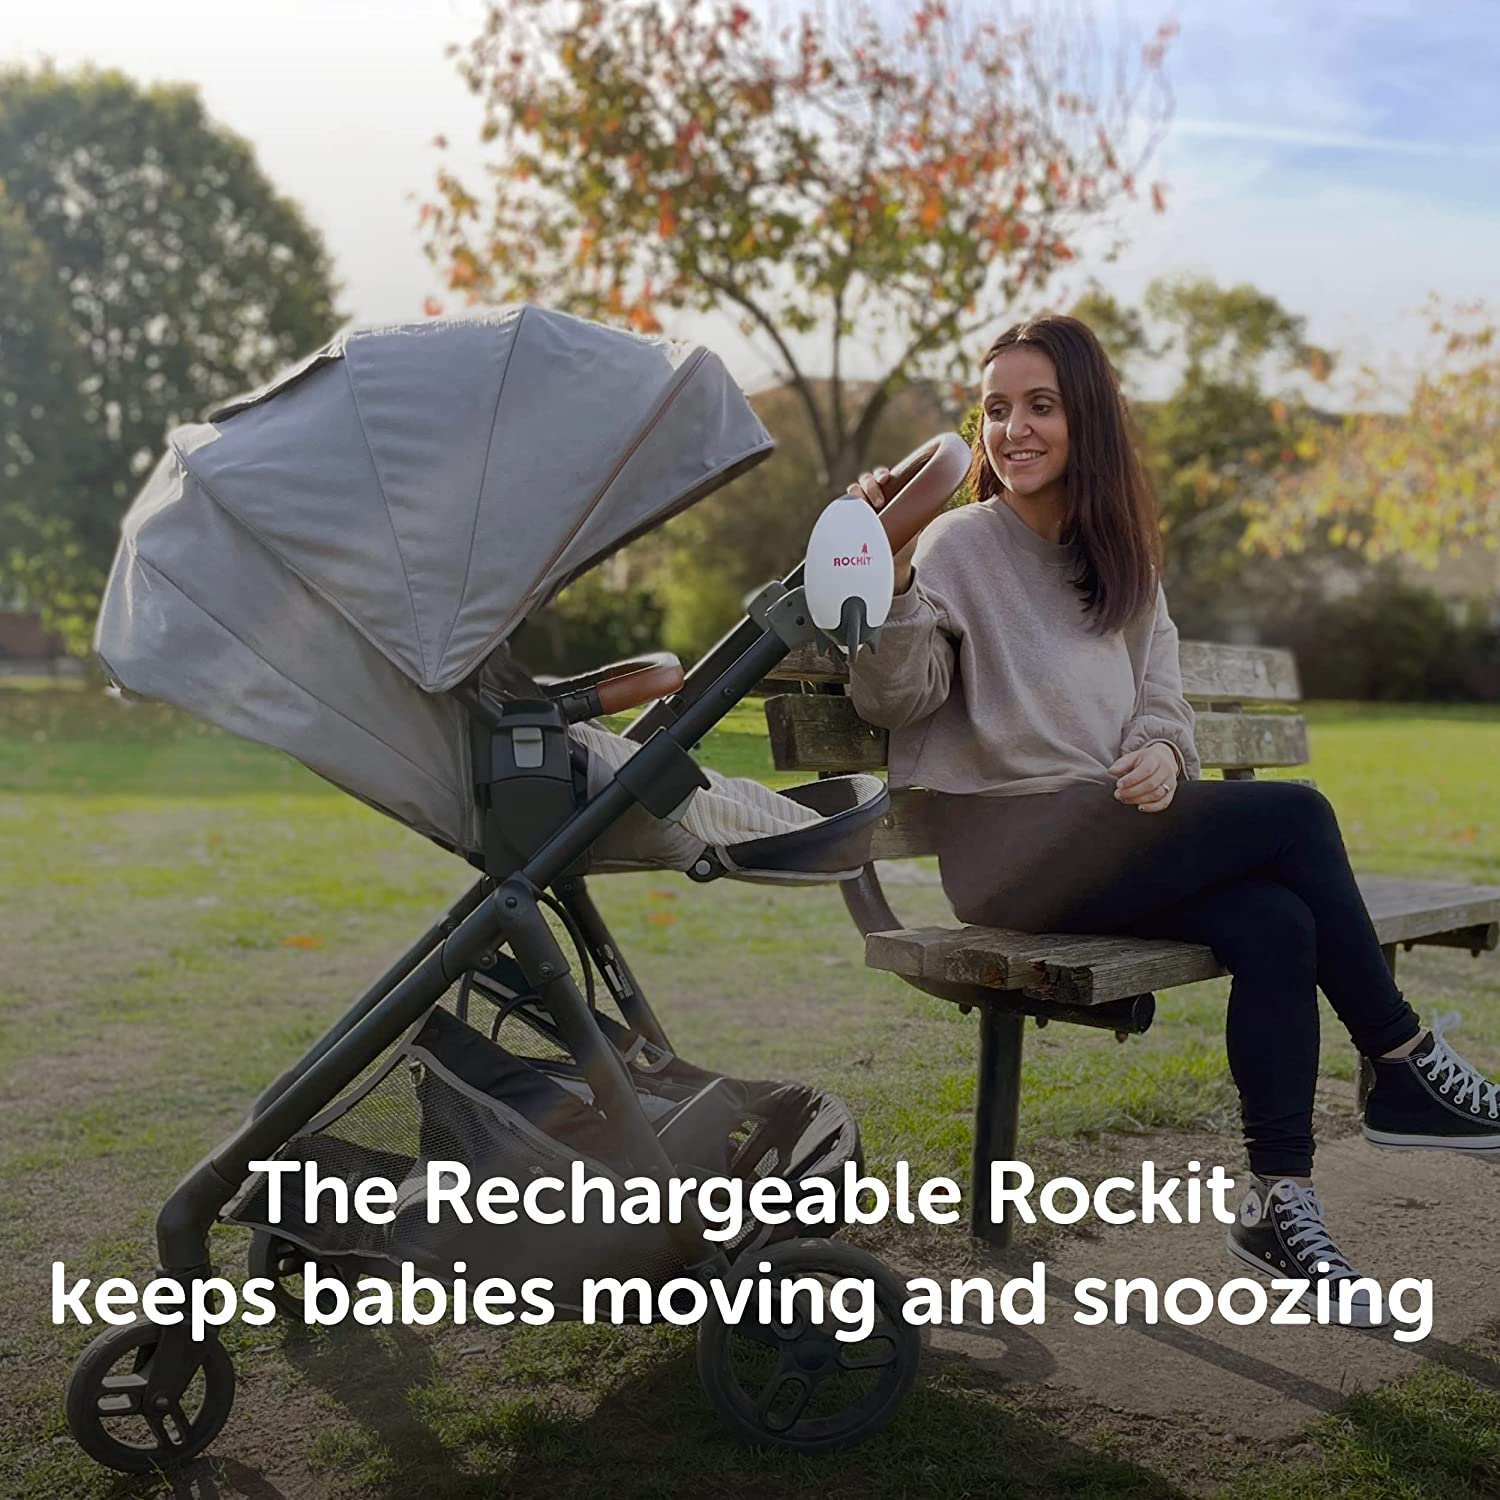 Rockit Portable Baby Rocker - Rechargeable Version - For Pram and